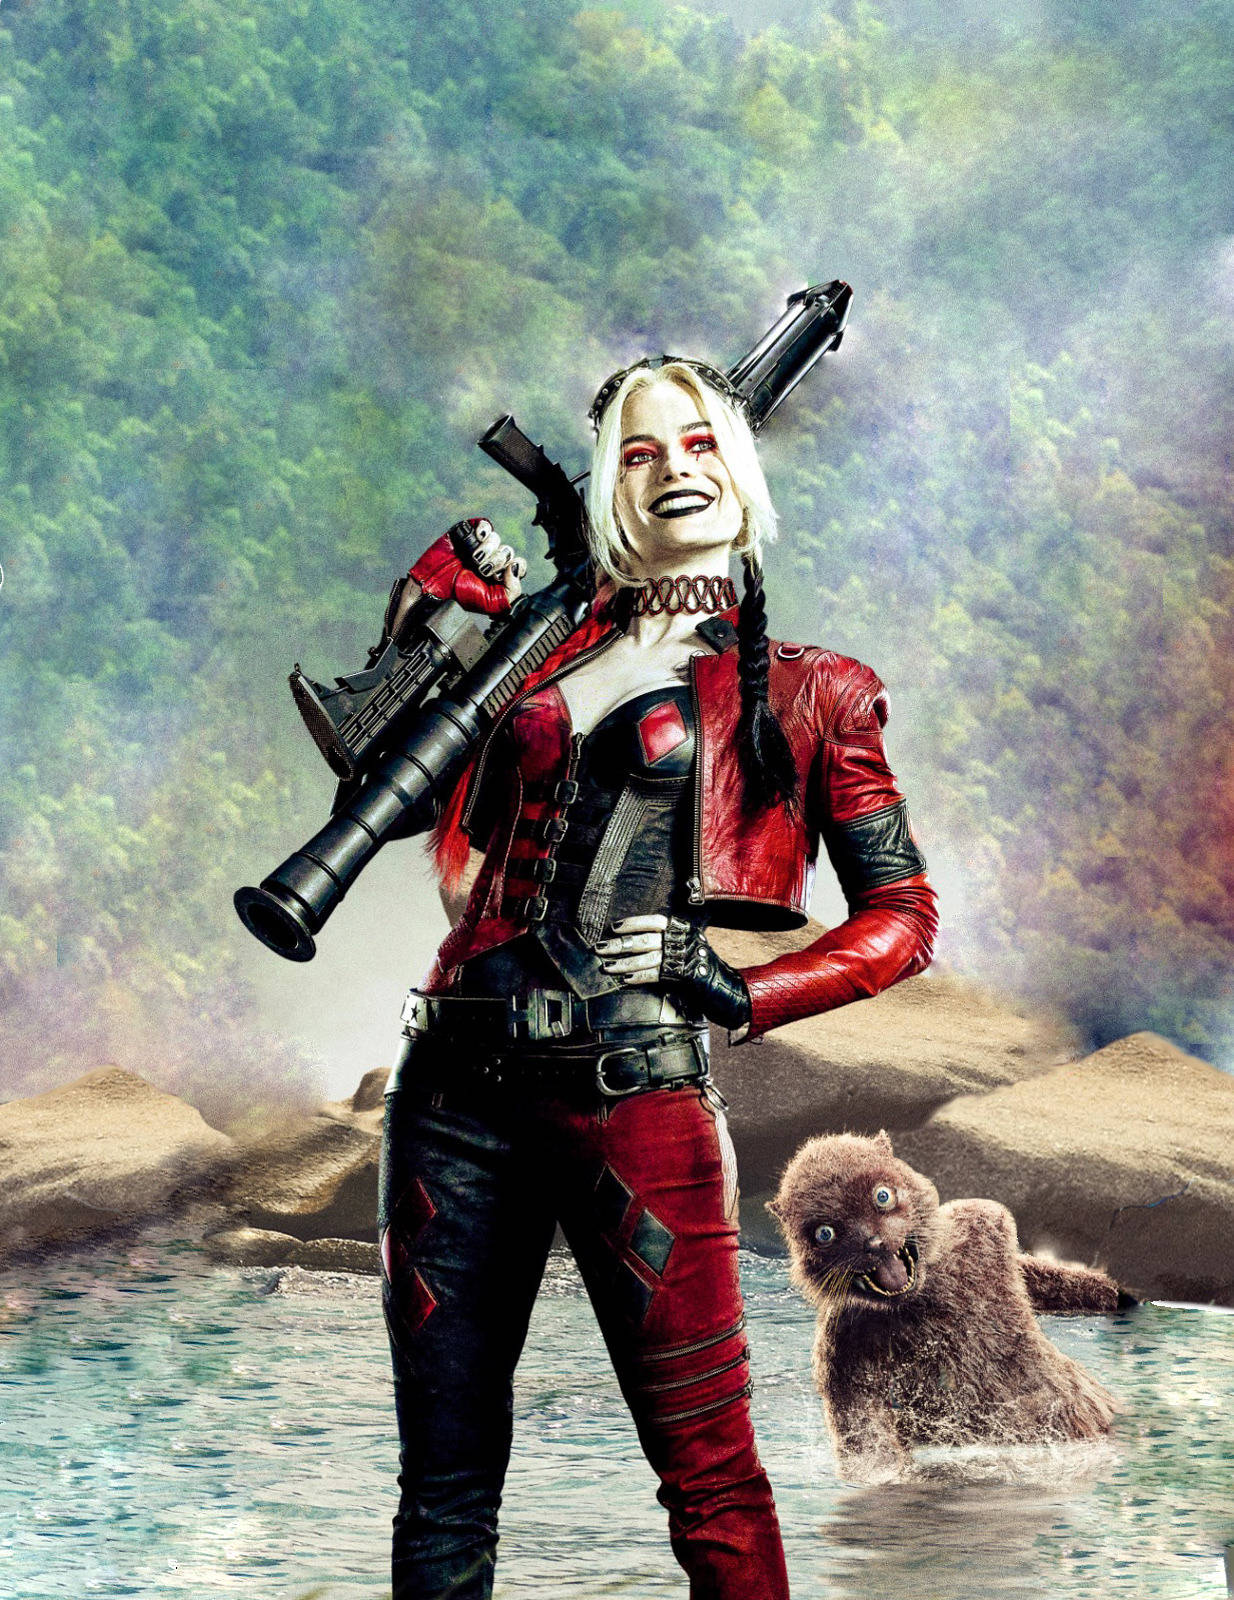 Harley Quinn looks ready to take on the world in her new tactical outfit. Wallpaper